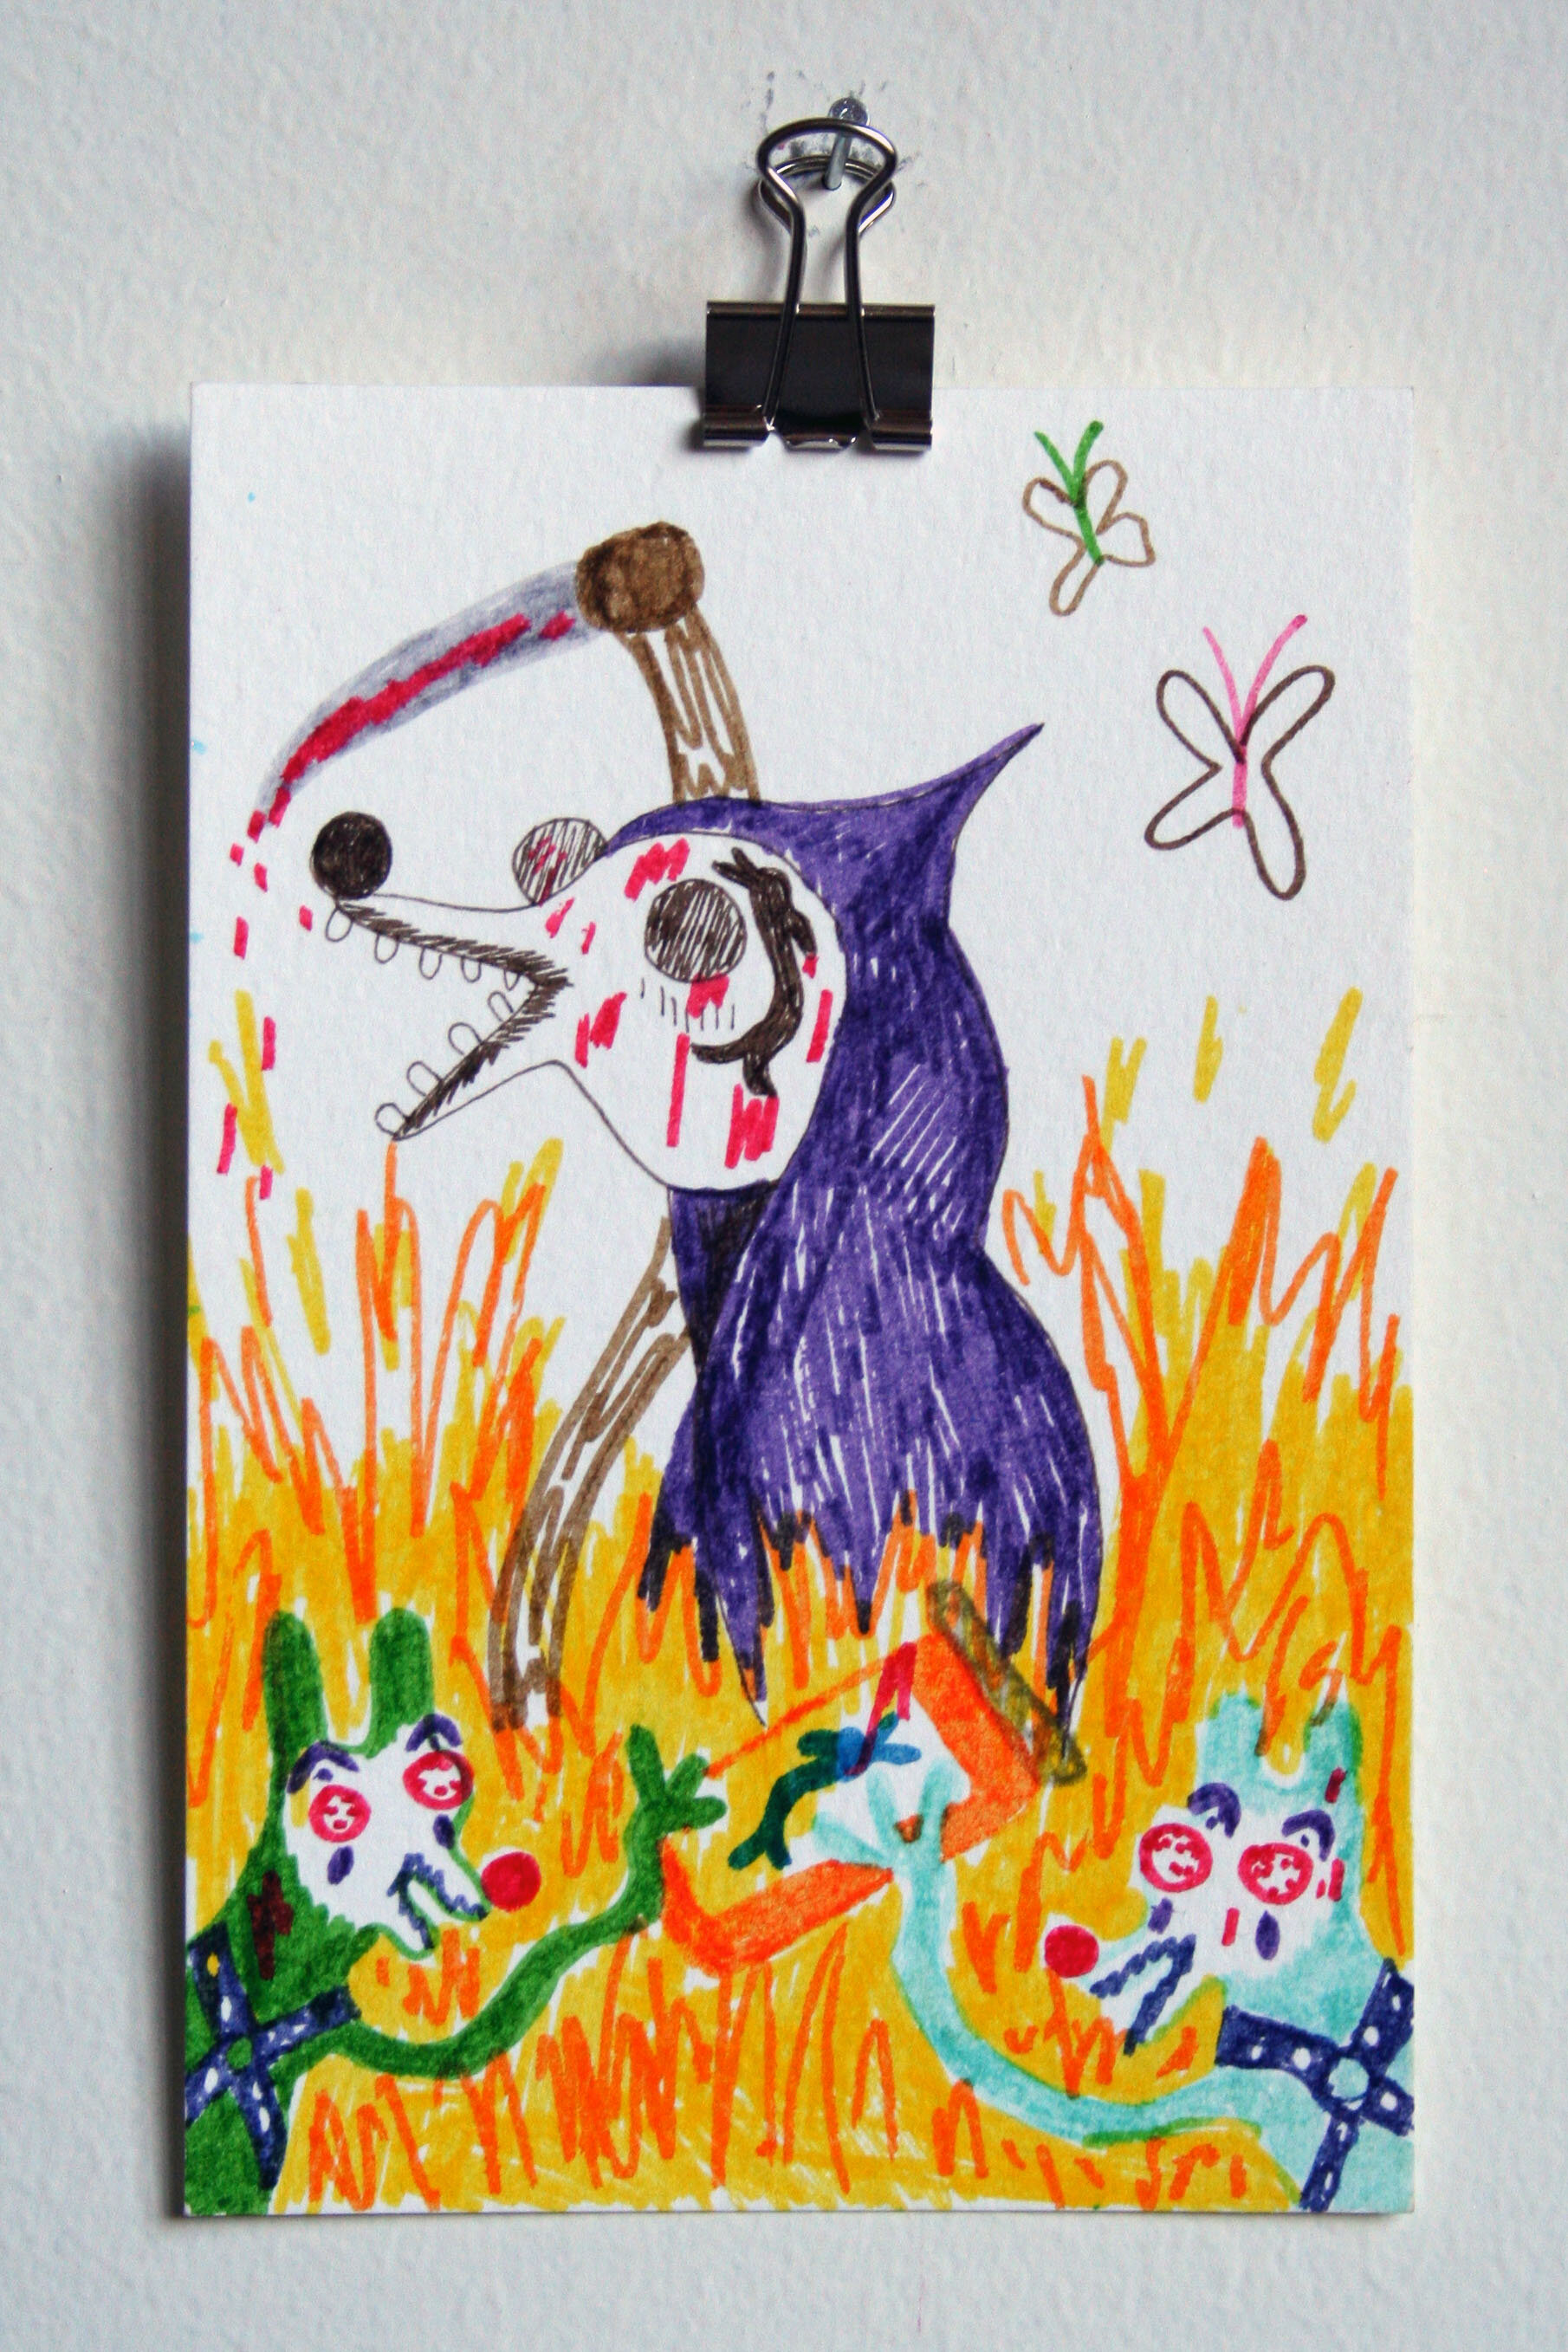   Death - Ghouls - Hell , 2015  6 x 4 inches (15.24 x 10.16 cm.)  Marker on paper 